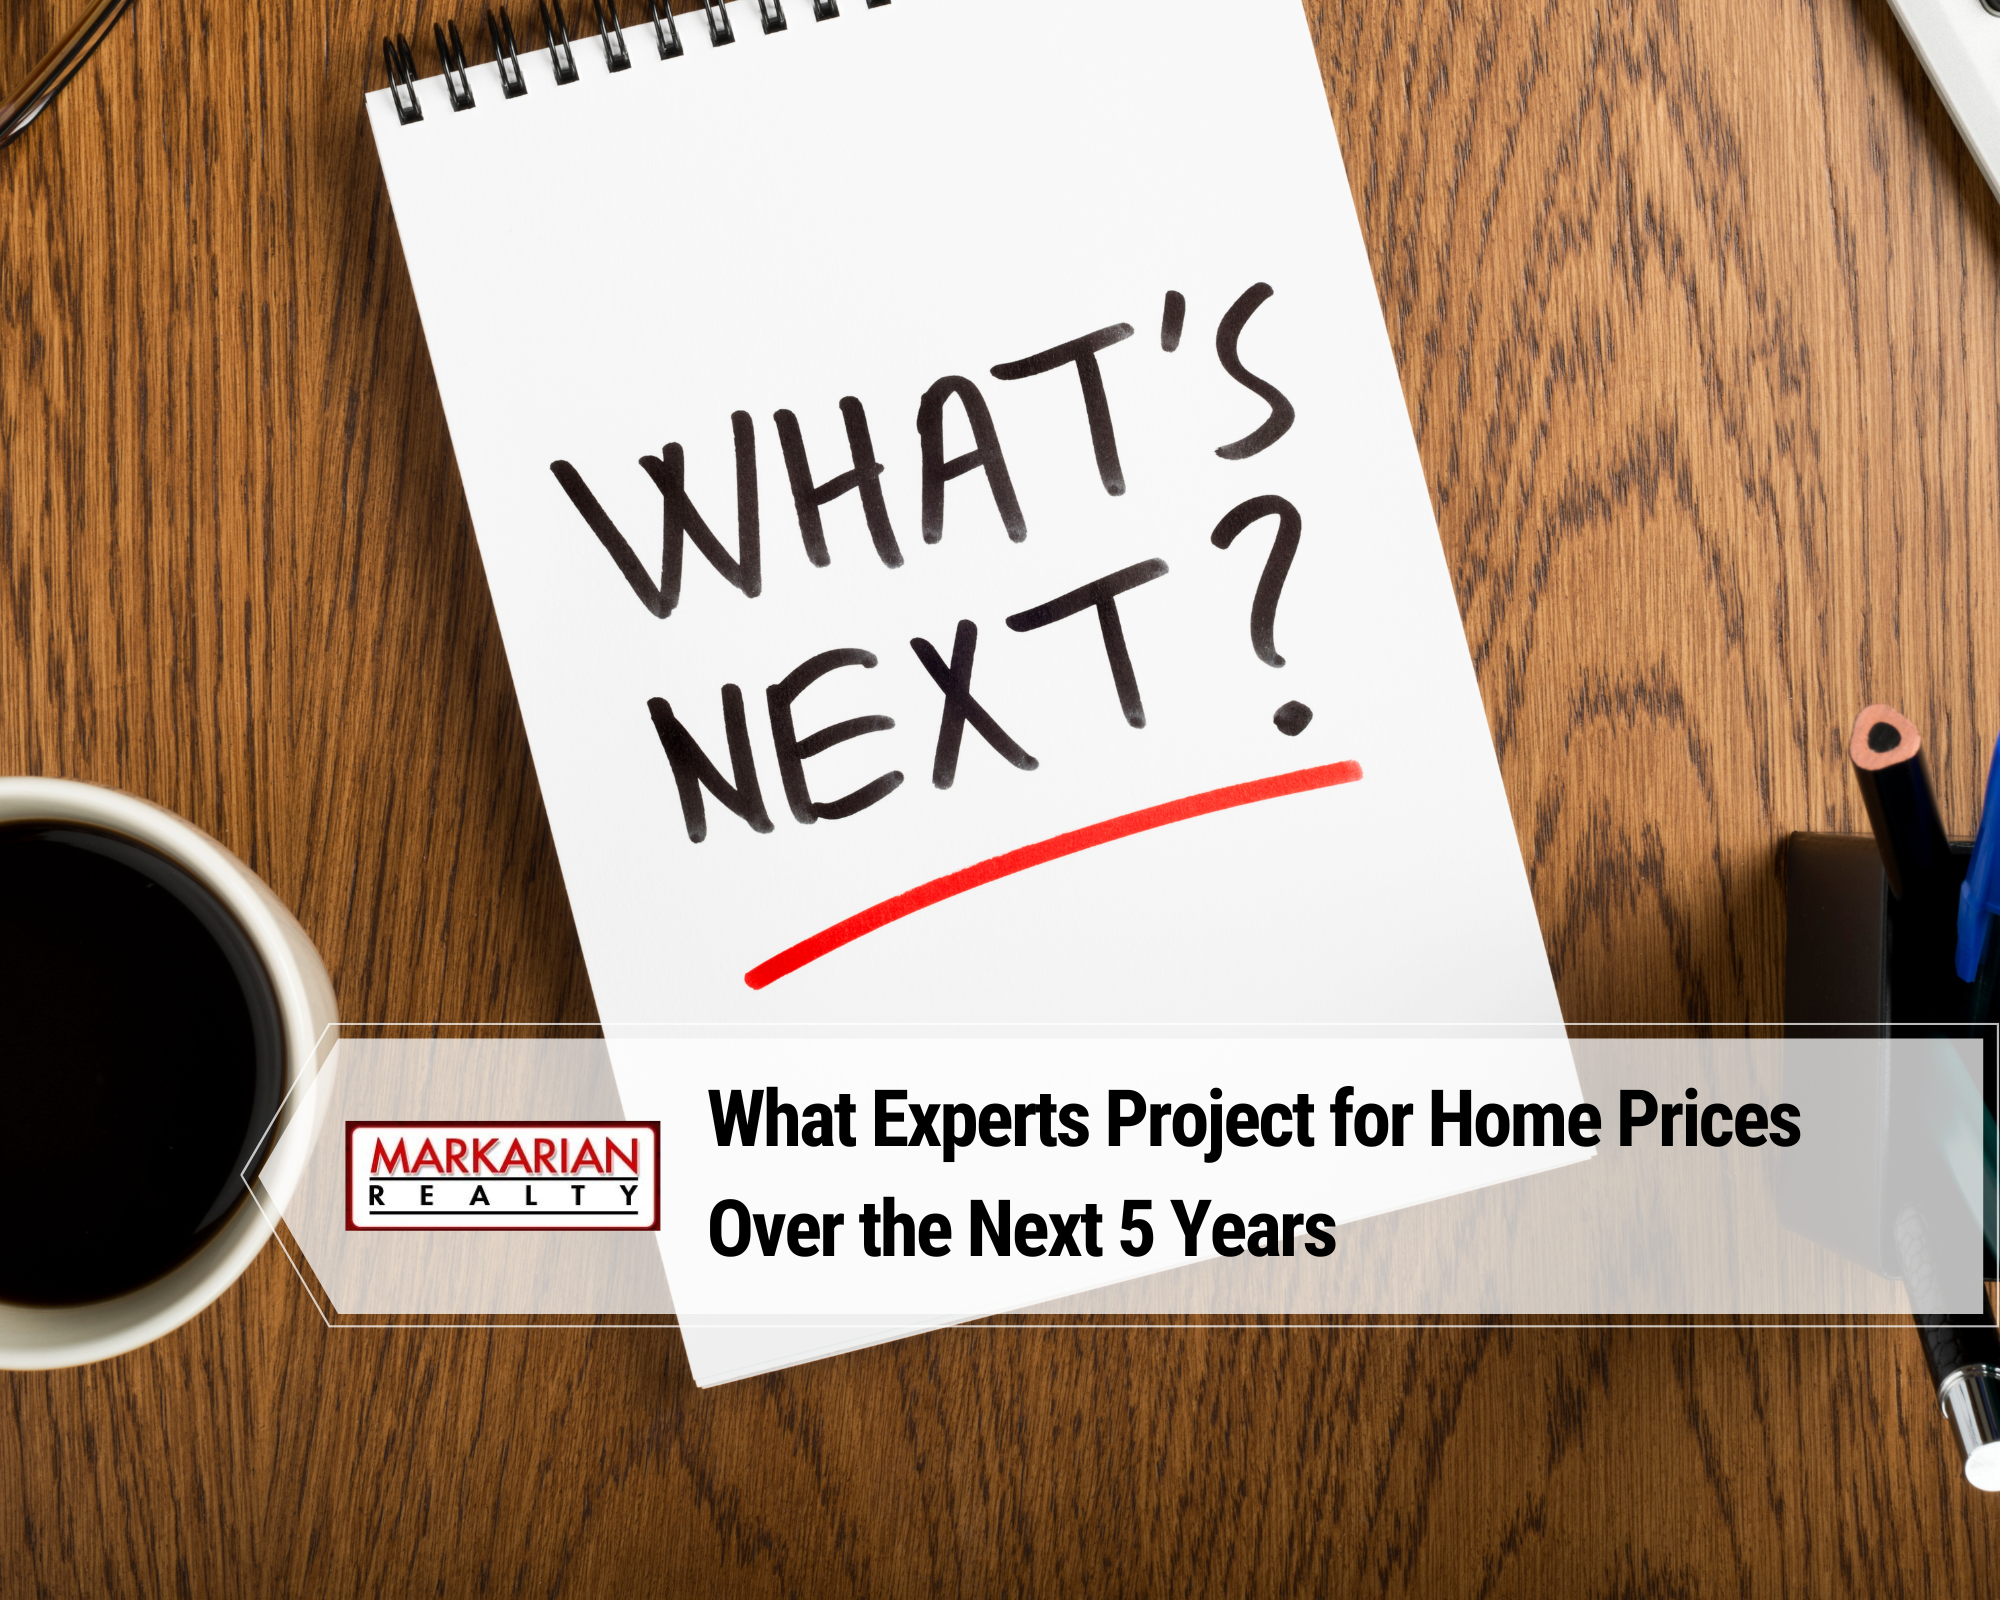 What Experts Project for Home Prices Over the Next 5 Years